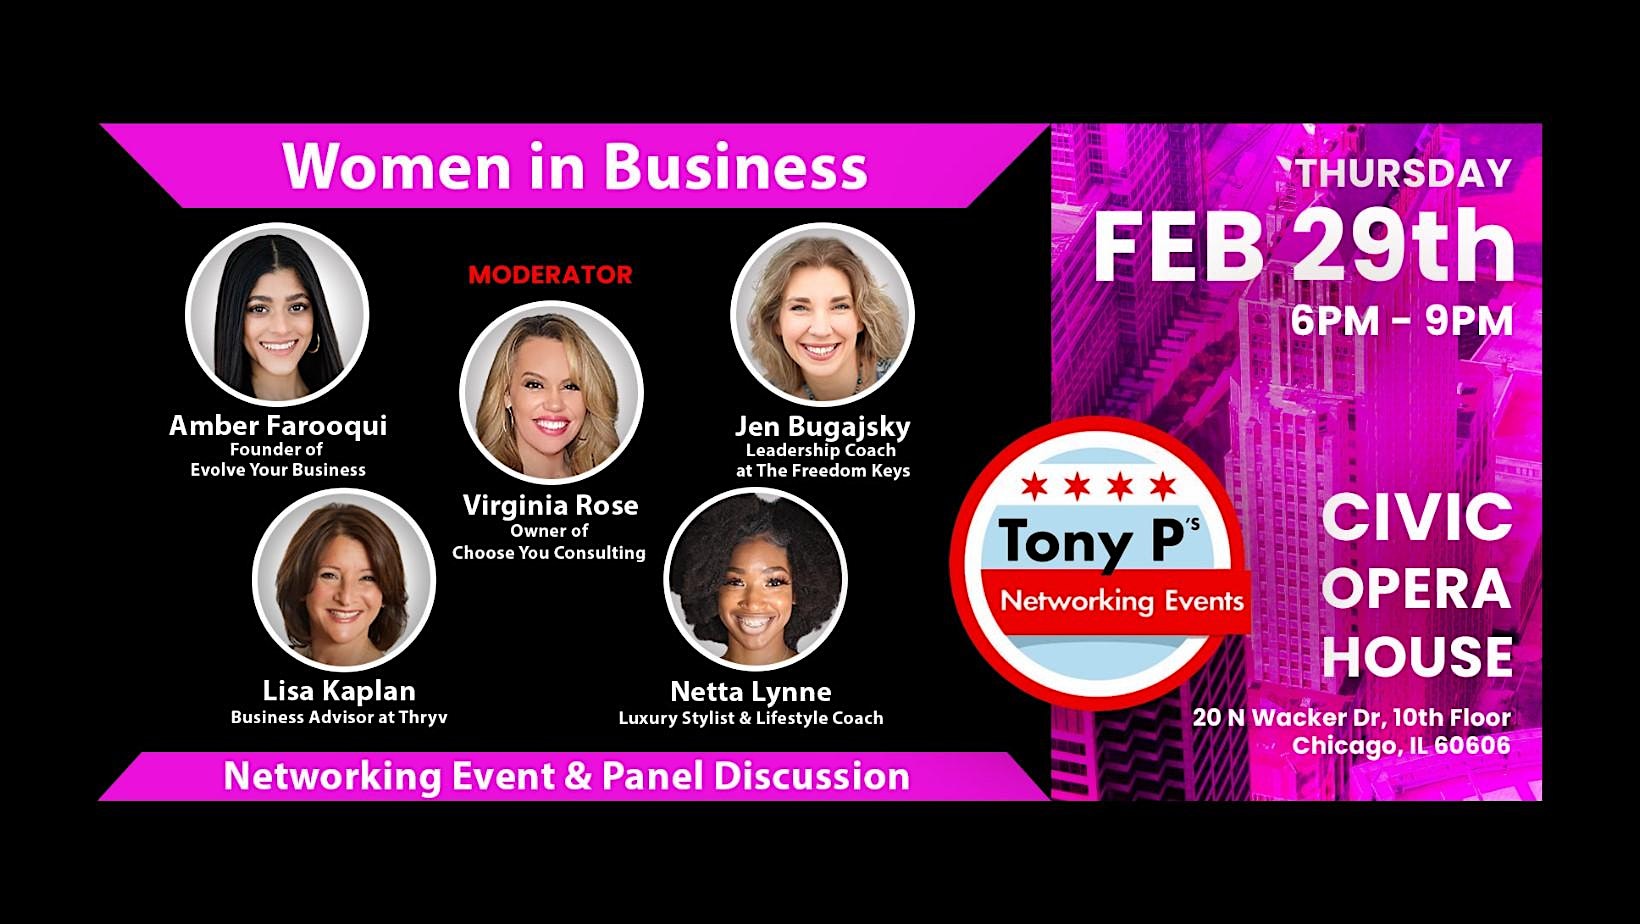 Women in Business Panel Discussion & Networking Event: Thursday Feb 29th